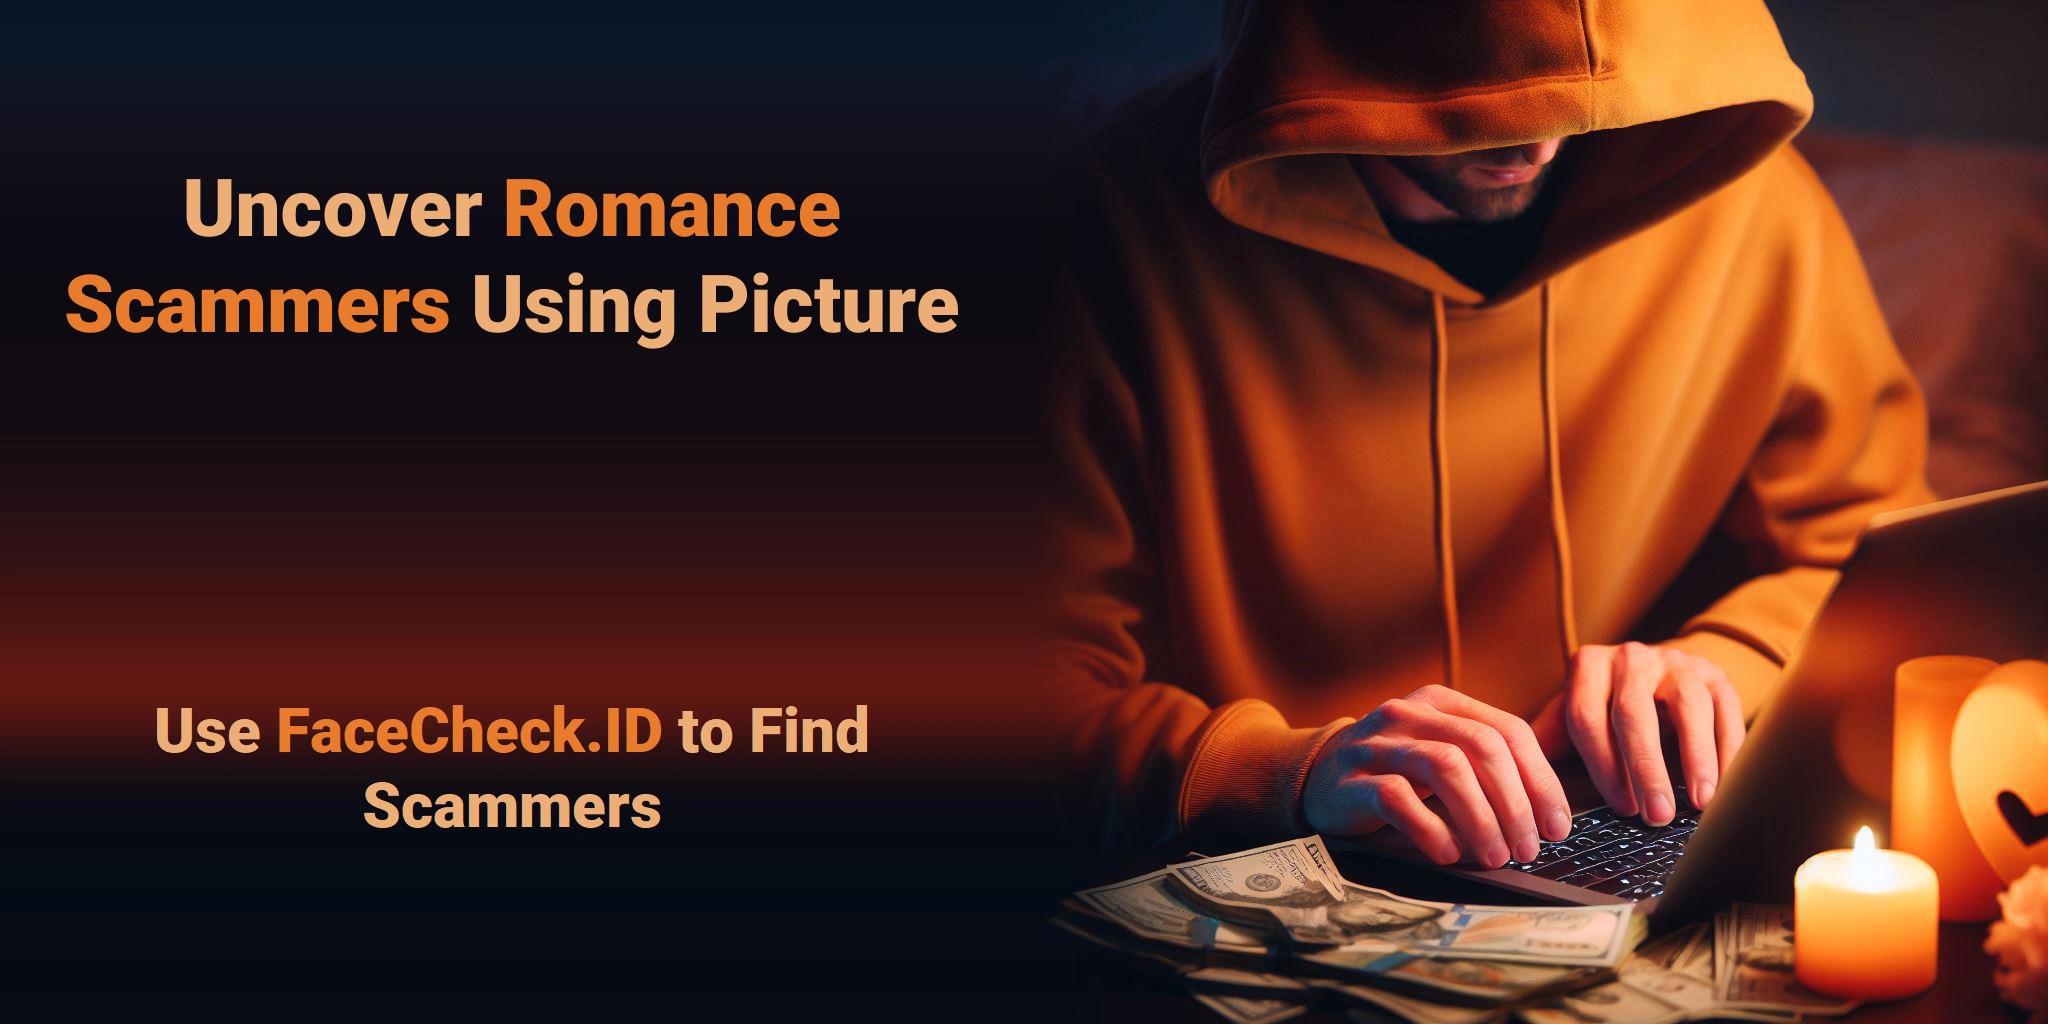 How to Uncover a Romance Scammer Using Just a Picture